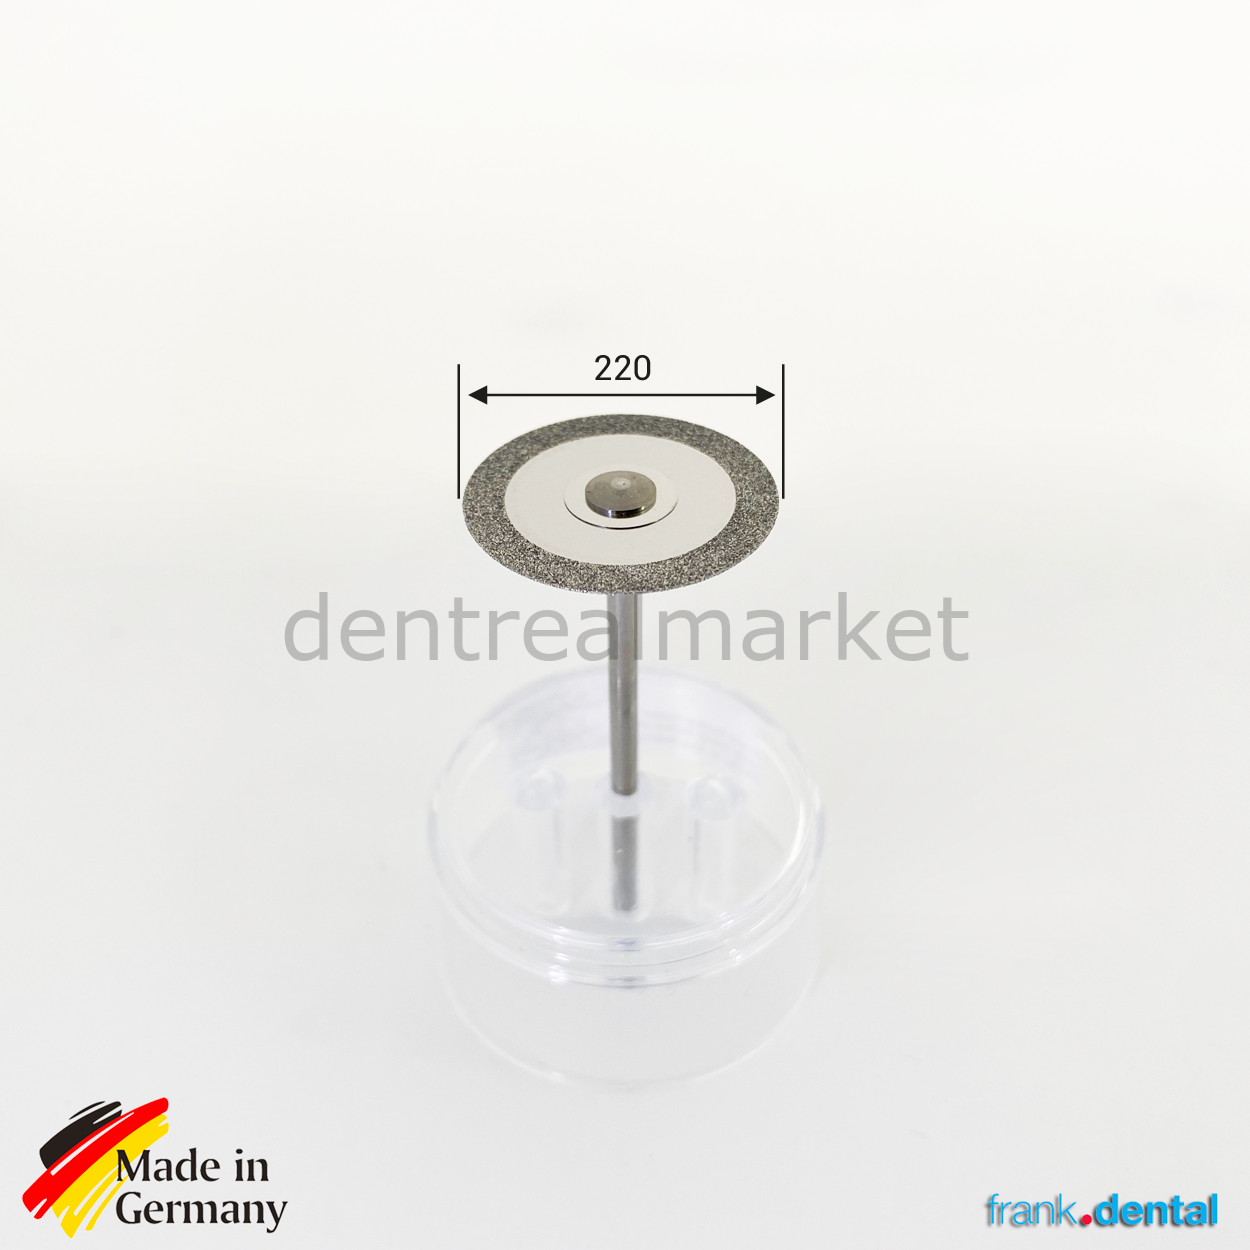 DentrealStore - Frank Dental Ortho Diamond Disc Interface Separe - 220mm Double Sided Etching